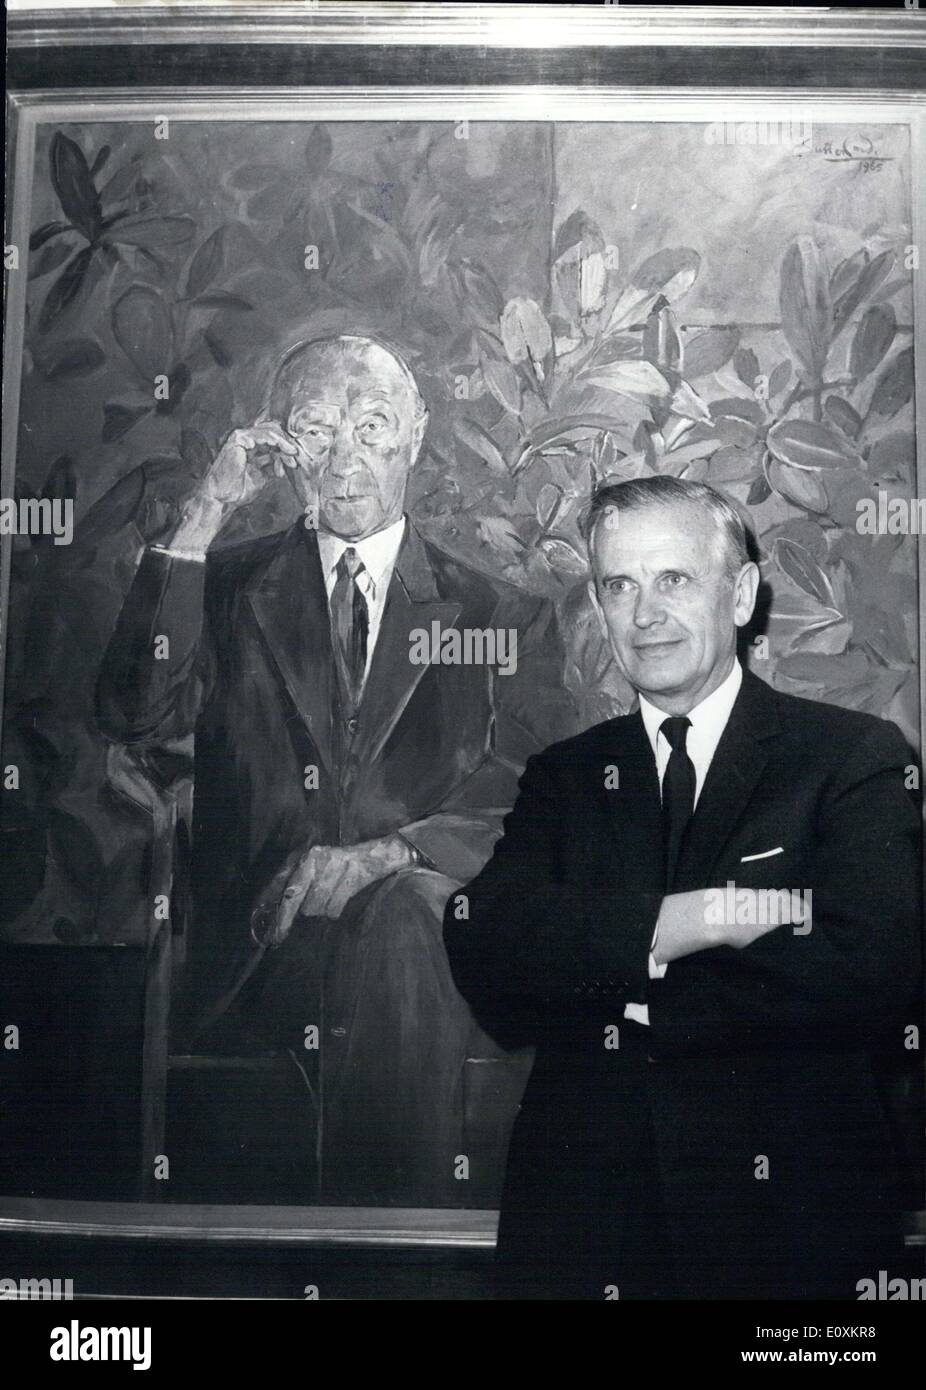 Mar. 09, 1967 - An exhibition of the works of English artist Graham Sutherland was put on display in Munich. 150 oil paintings, Stock Photo